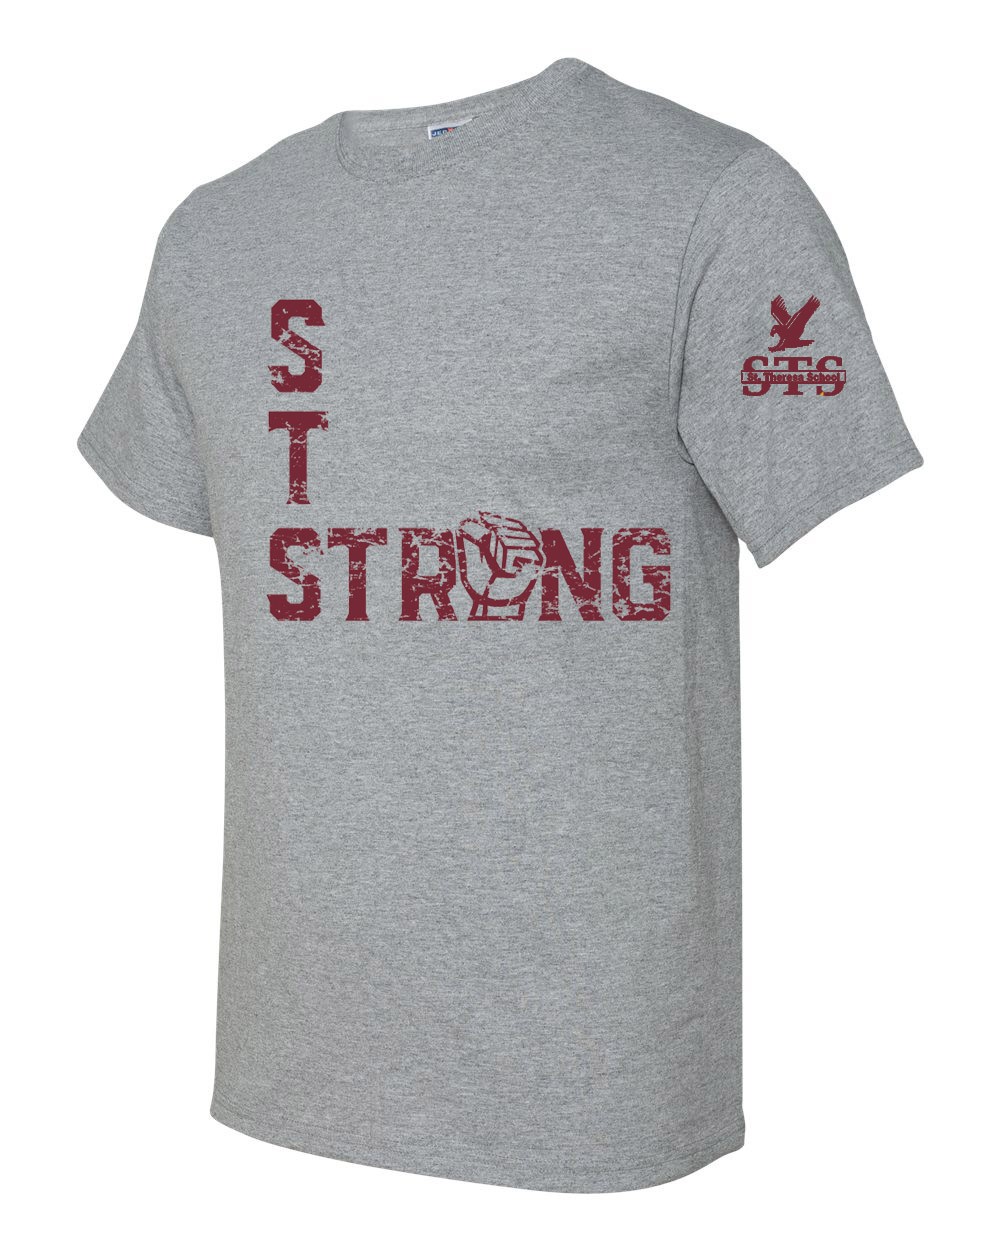 STS Fist S/S Spirit T-Shirt w/ Maroon Logo - Please Allow 2-3 Weeks for Delivery